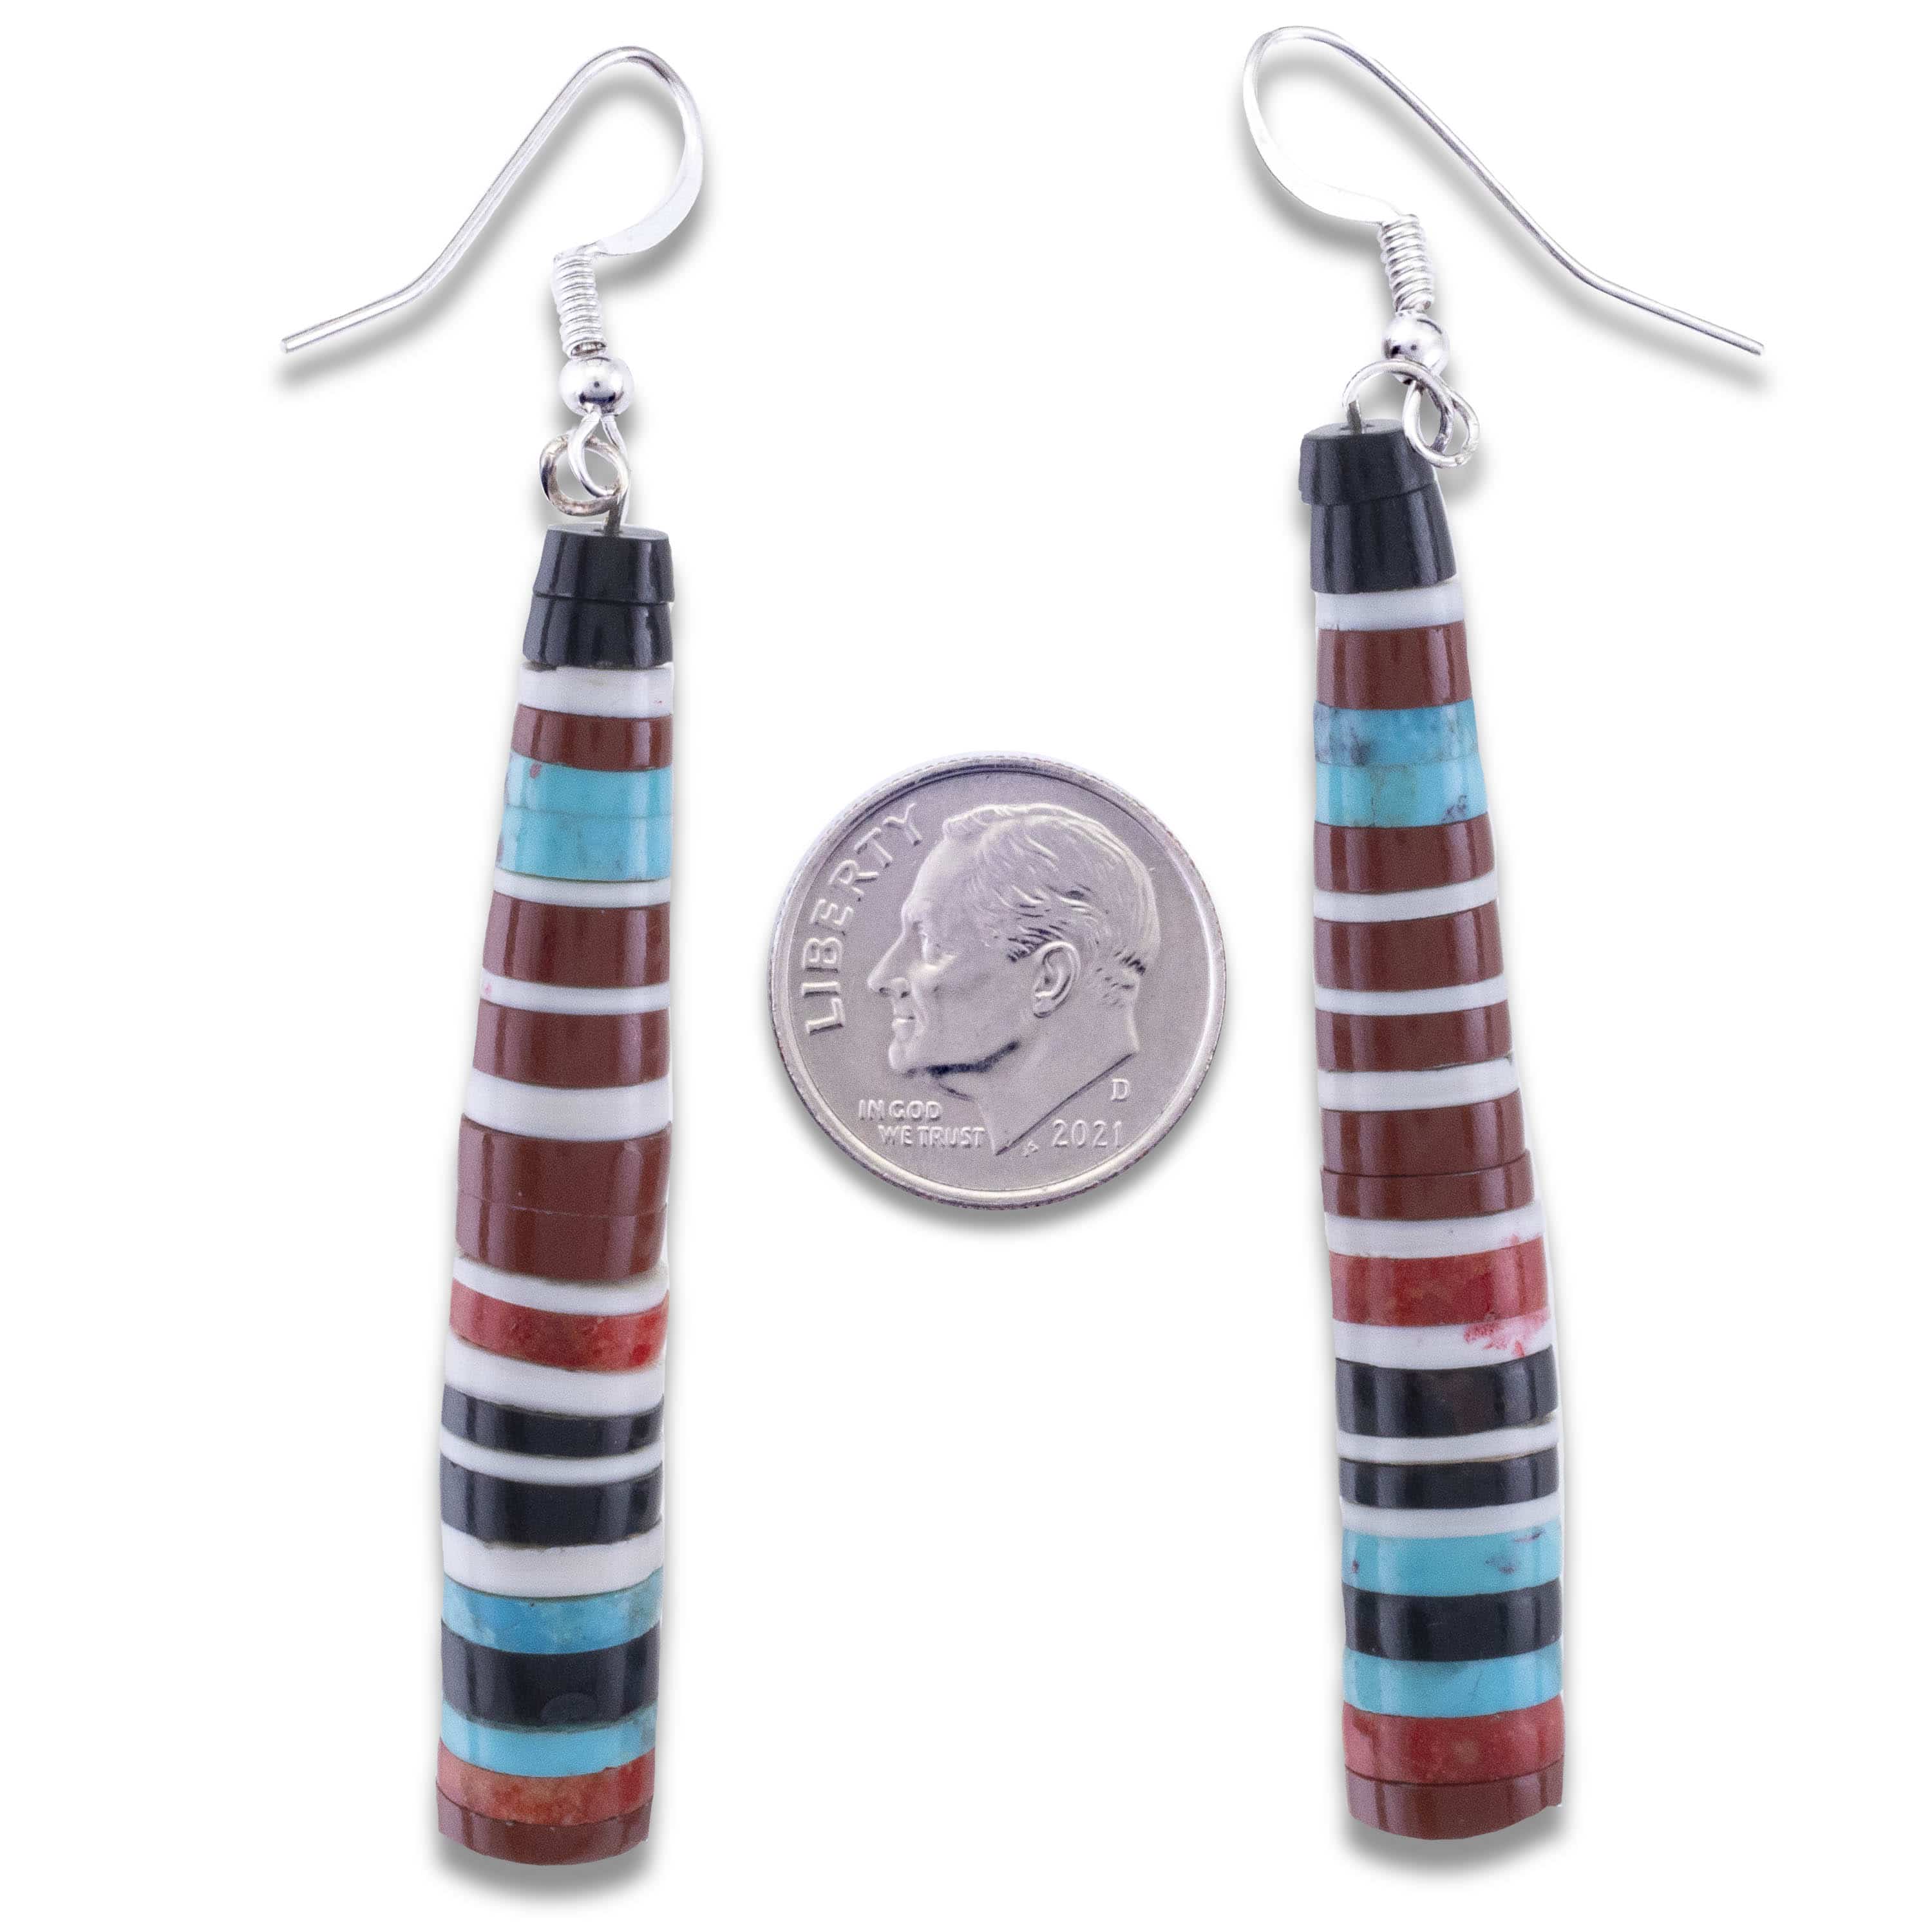 Kalifano Native American Jewelry Pula Calabaza Santo Domingo Heishi Turquoise, Jet, Howlite, Coral and Spiny Oyster Shell USA Native American Made 925 Sterling Silver Dangly Earrings NAE400.025